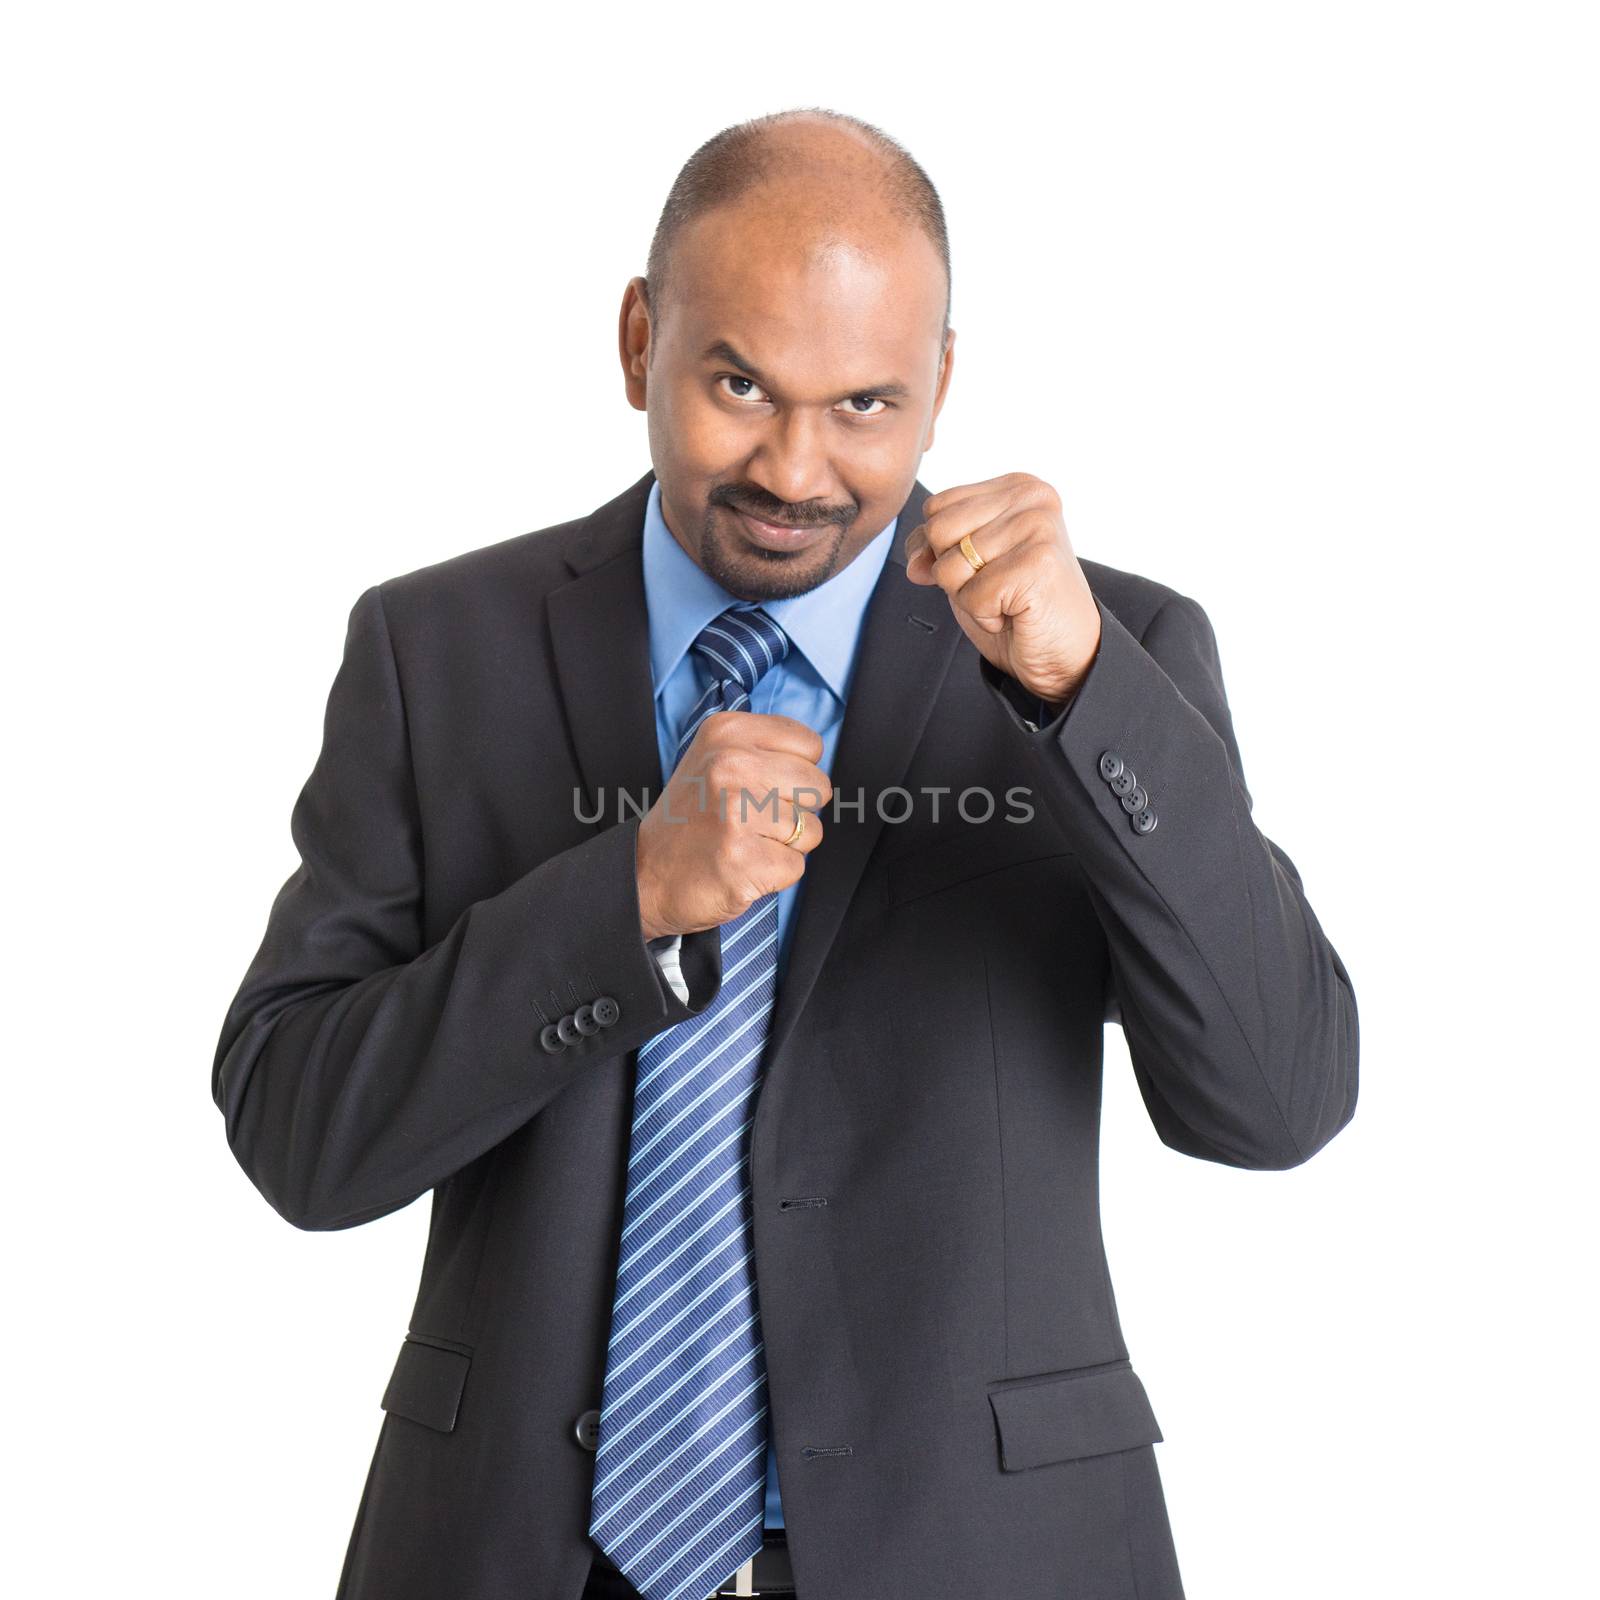 Mature Indian businessman in kungfu fighting mood, standing on plain background with shadow.